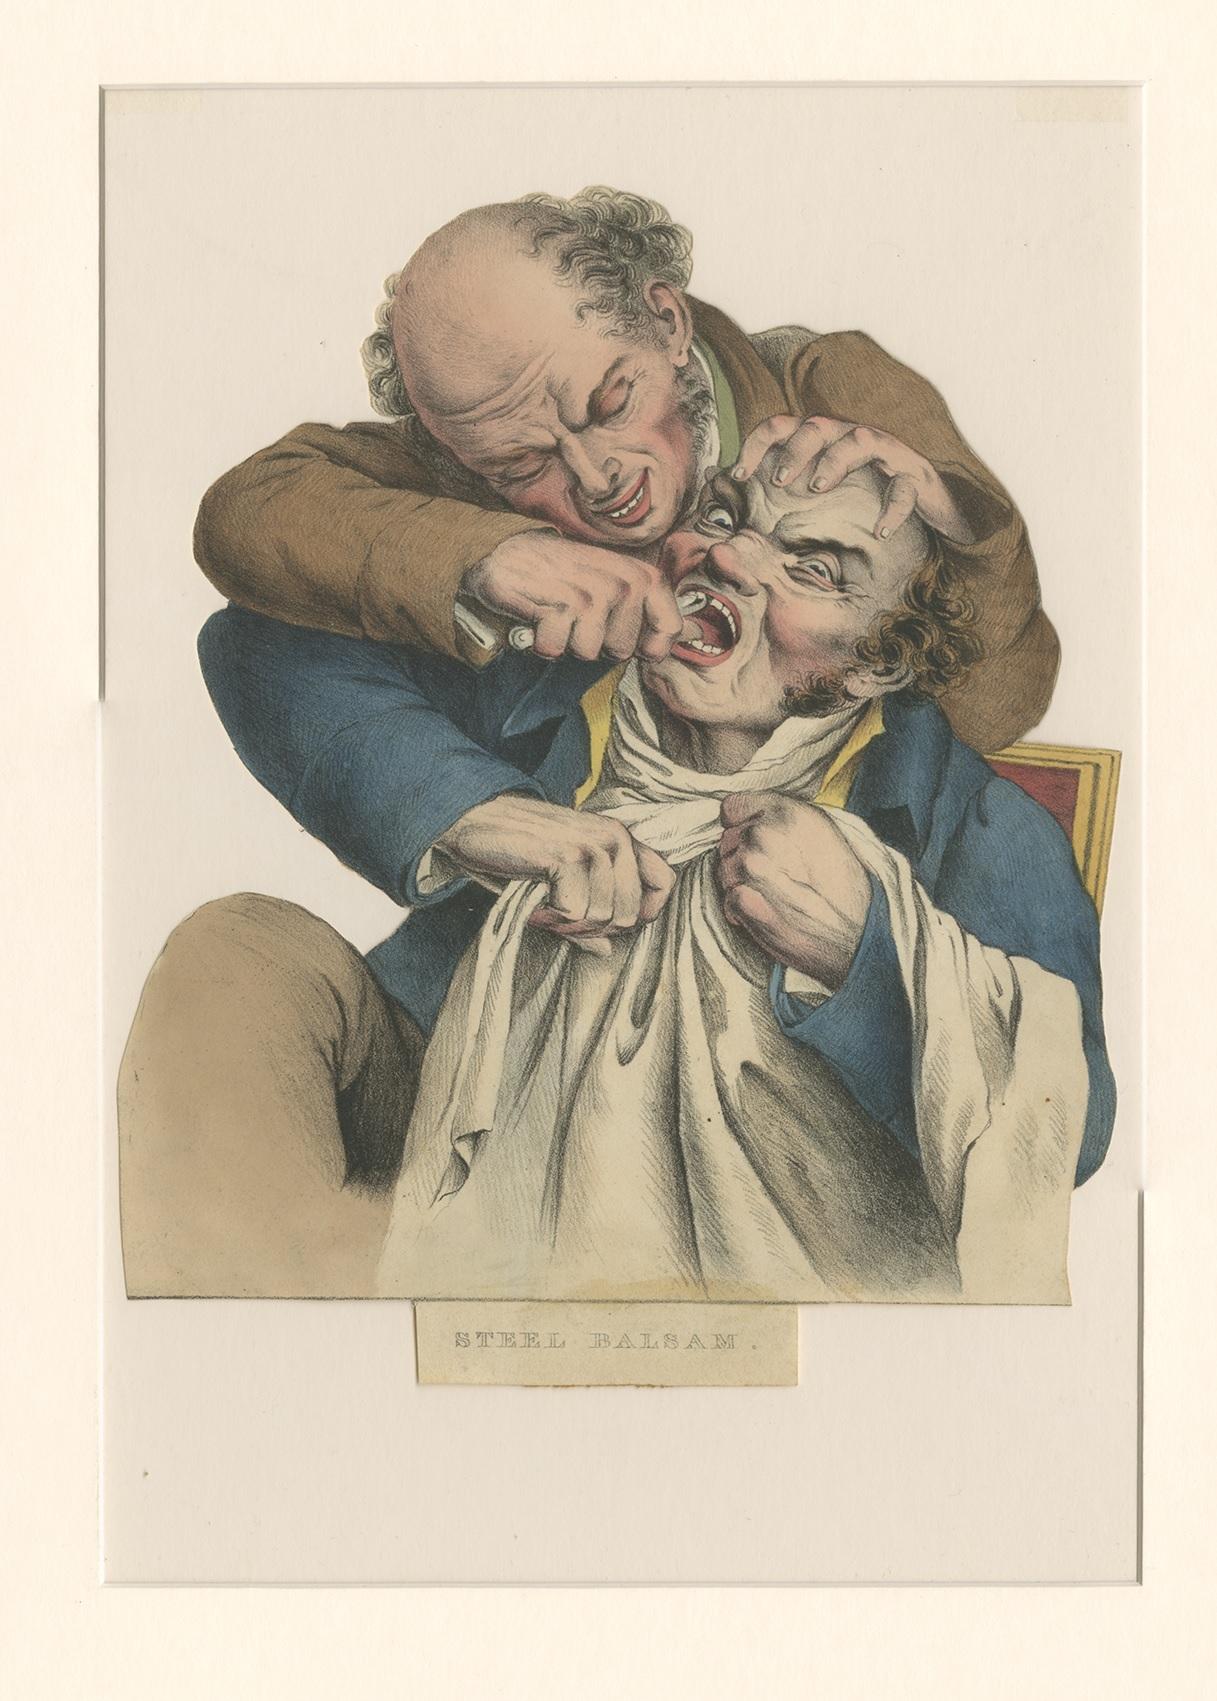 Antique print titled 'Steel Balsam'. This dentistry caricature shows a dentist extracting a tooth using steel pliers. The title of this version of this work is 'Steel Balsam' with balsam here being an archaic term for balm or treatment. The